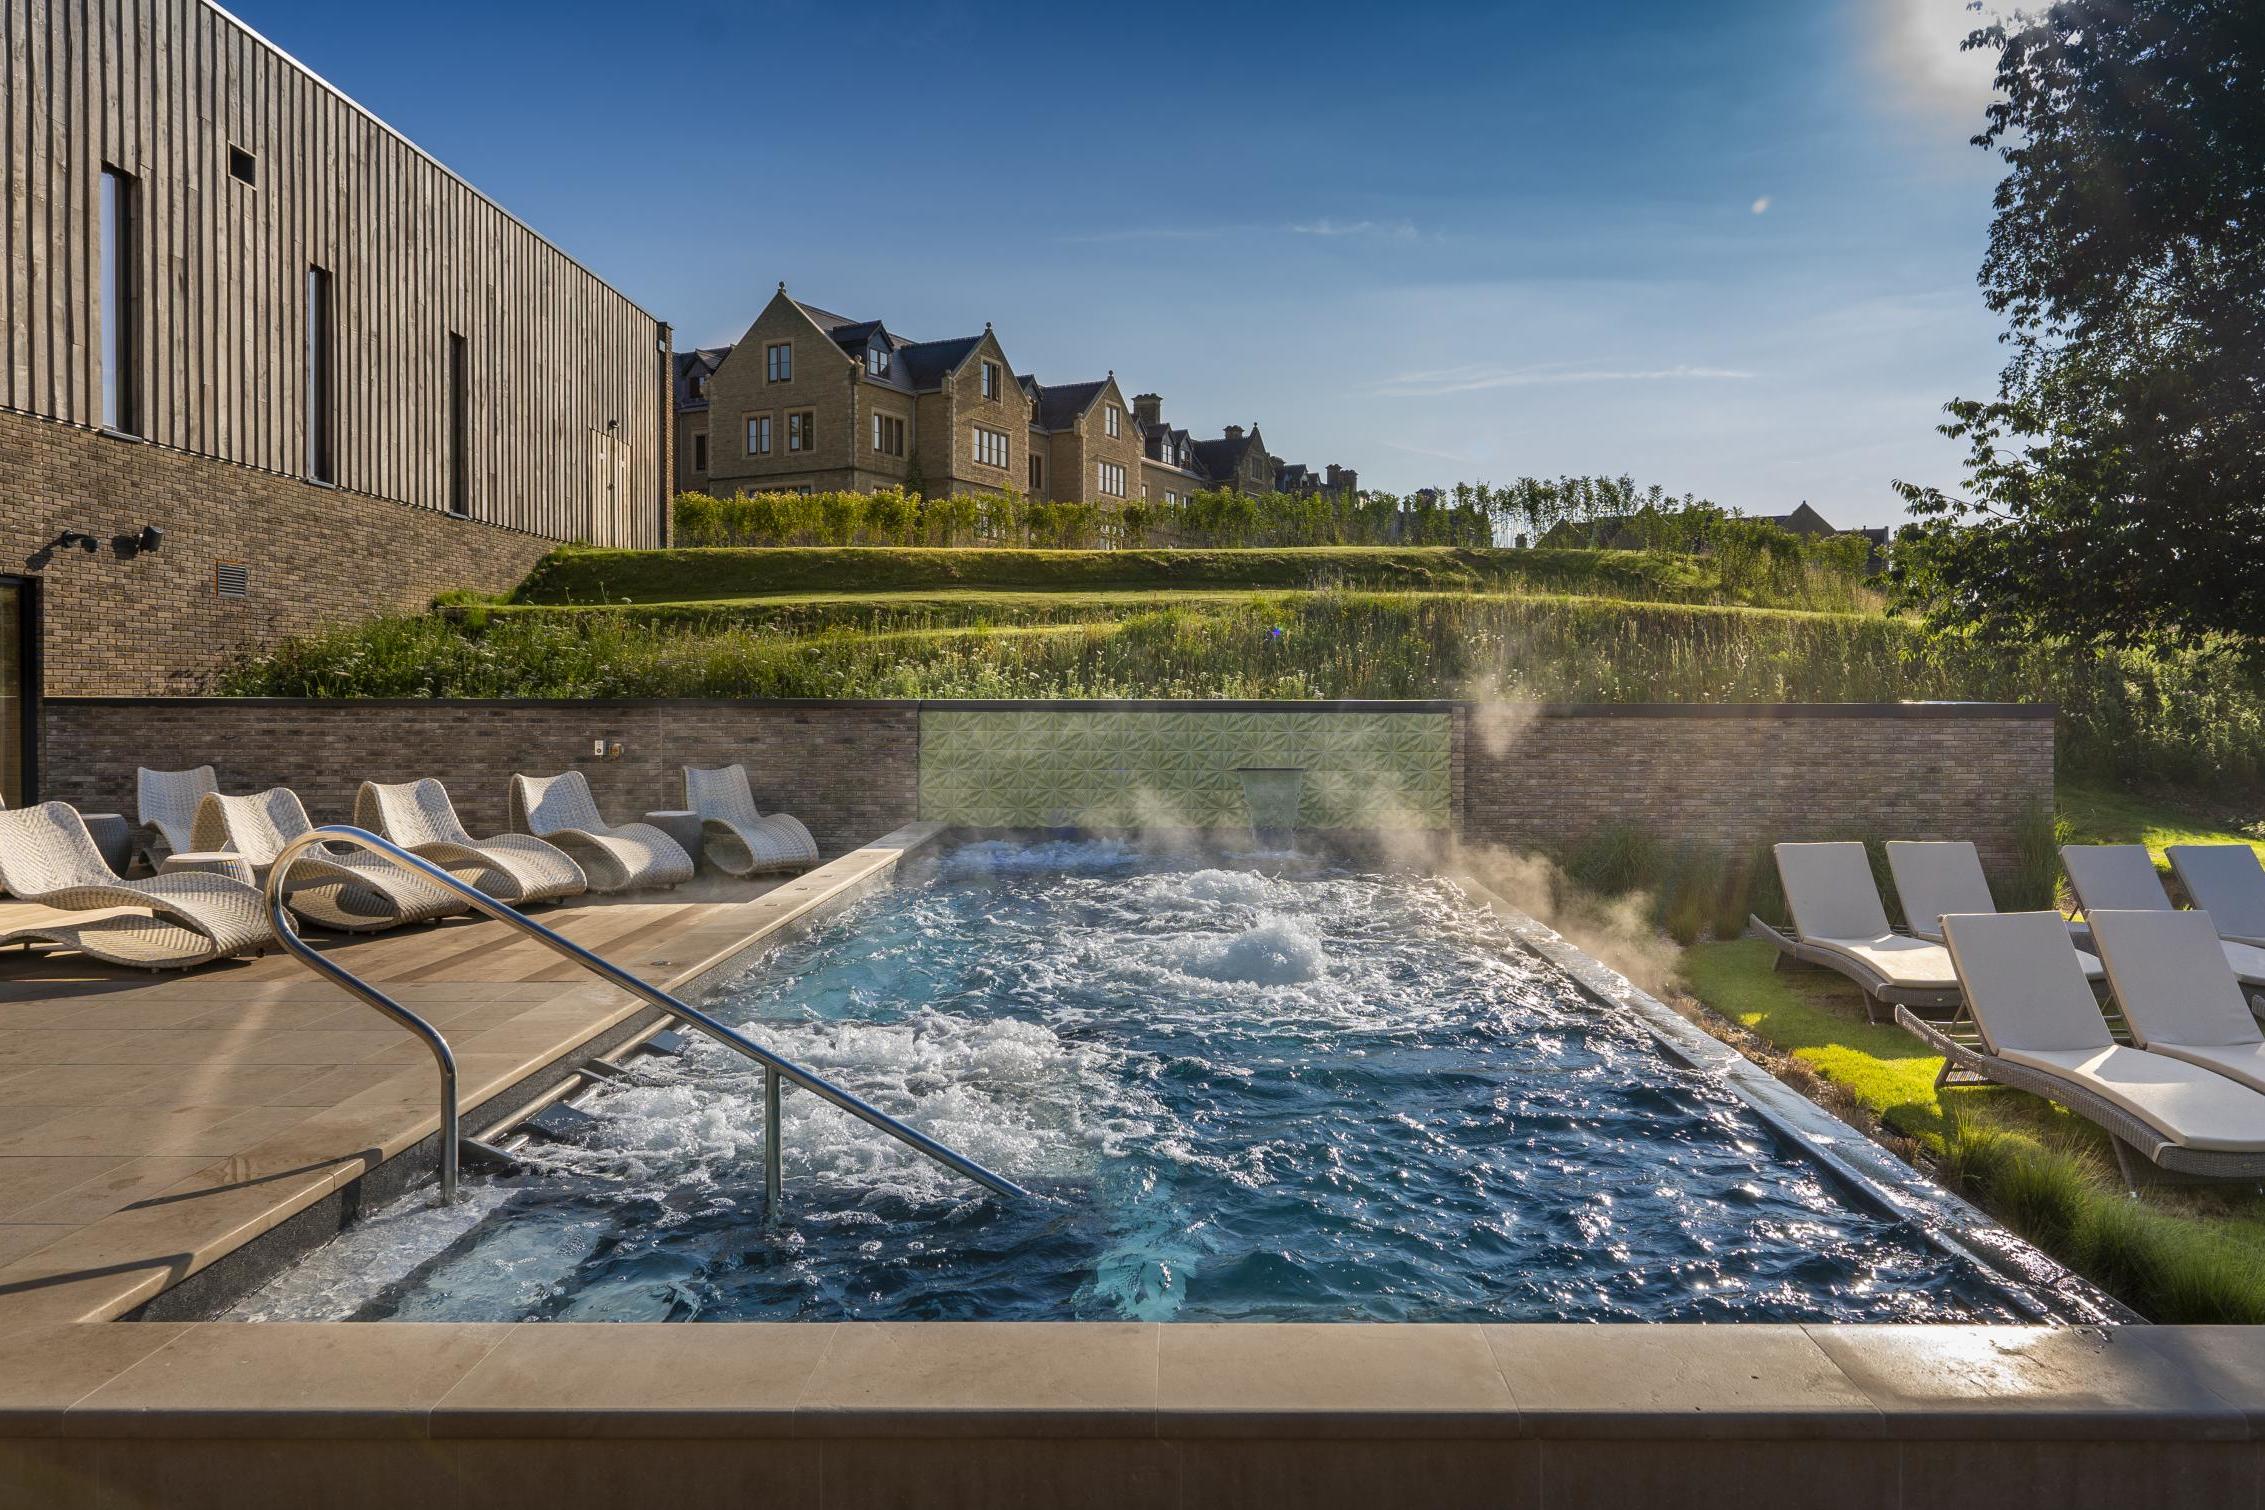 South Lodge in Horsham, West Sussex, features an indoor infinity pool, outdoor hydrotherapy pool, and a wild-swimming pond